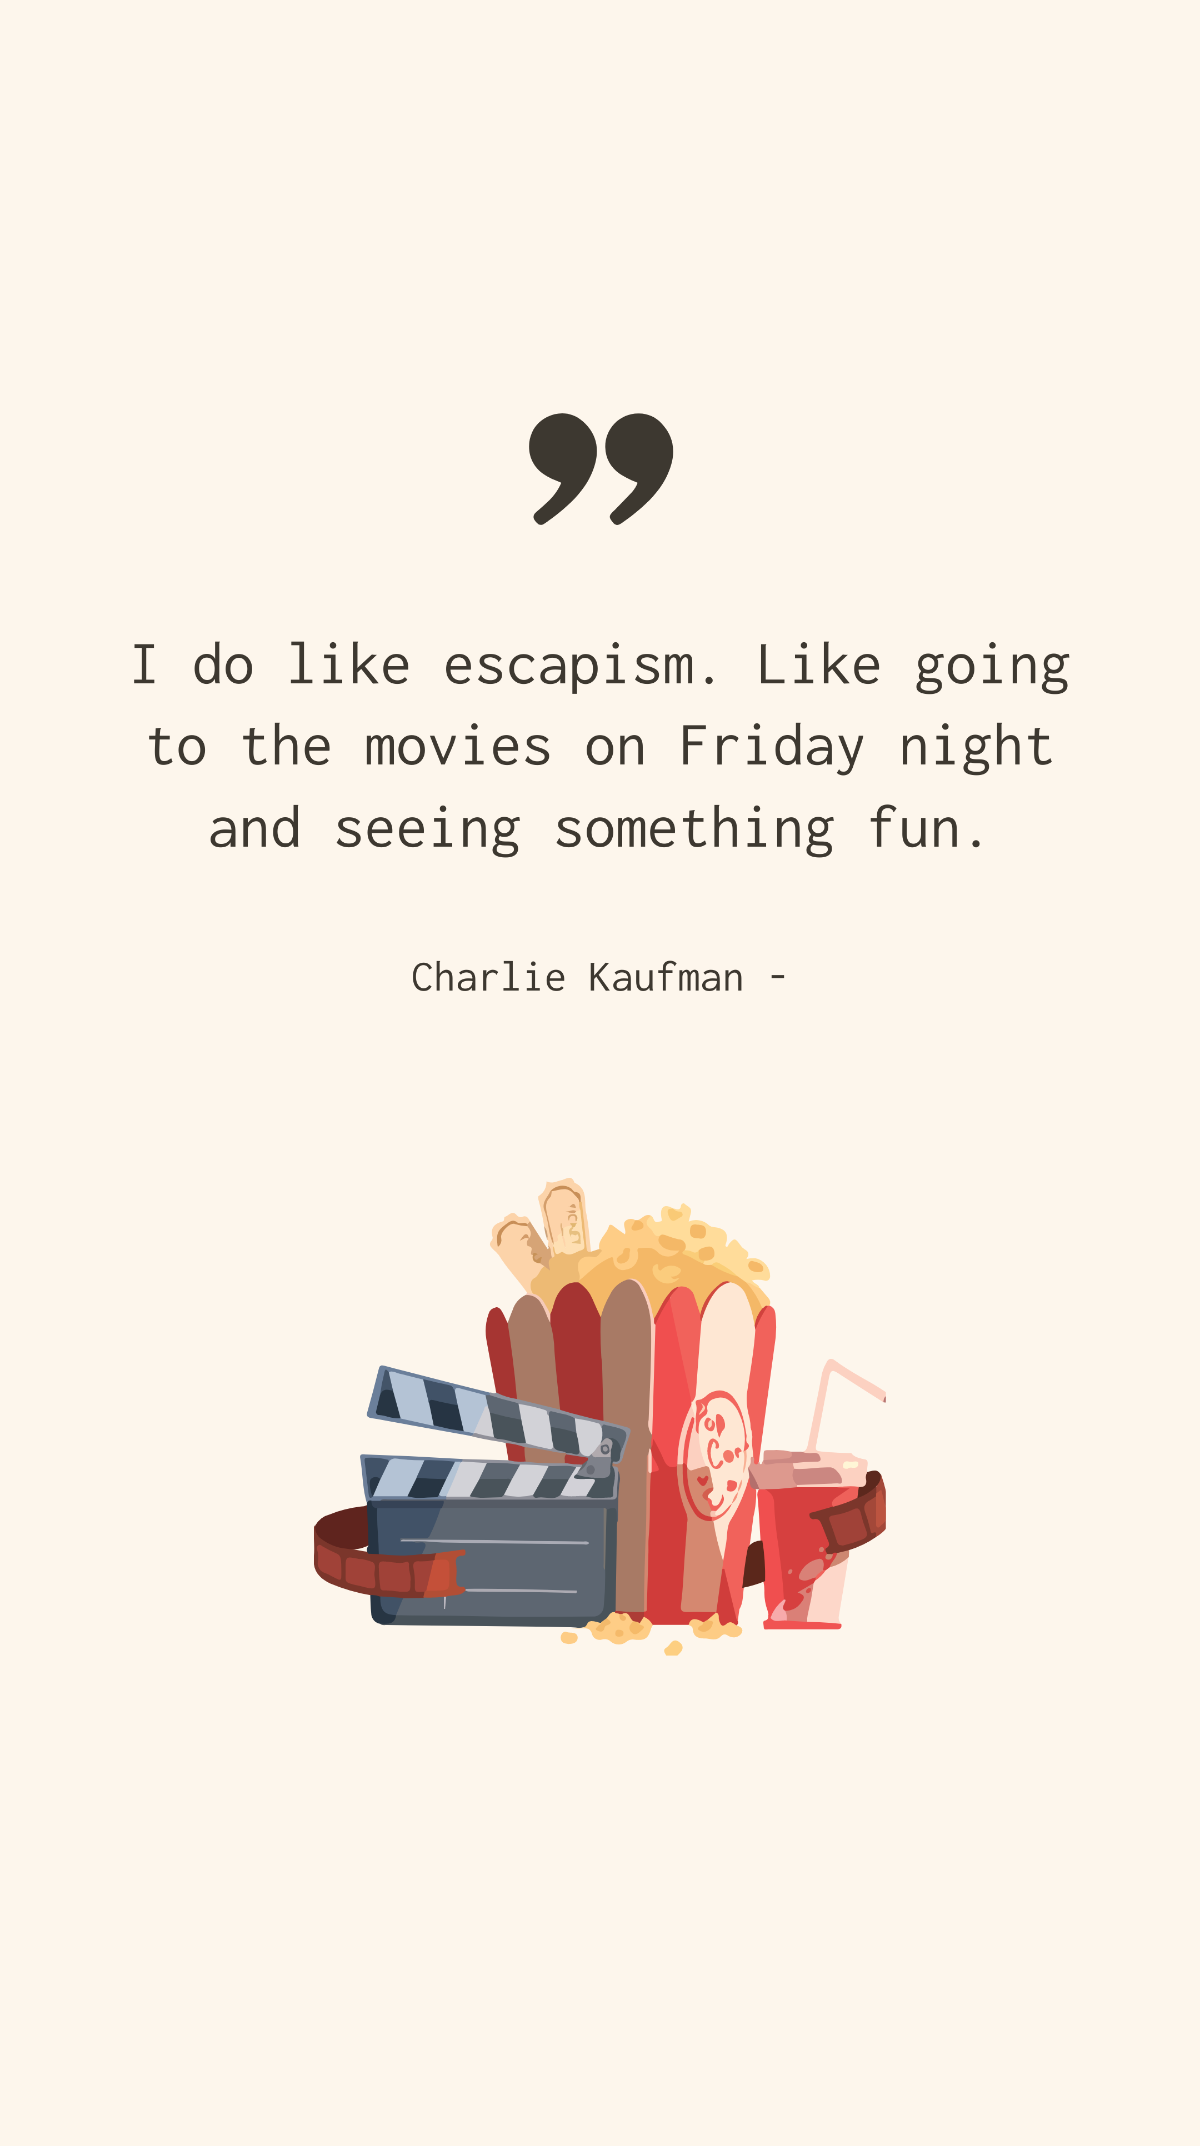 Charlie Kaufman - I do like escapism. Like going to the movies on Friday night and seeing something fun. Template